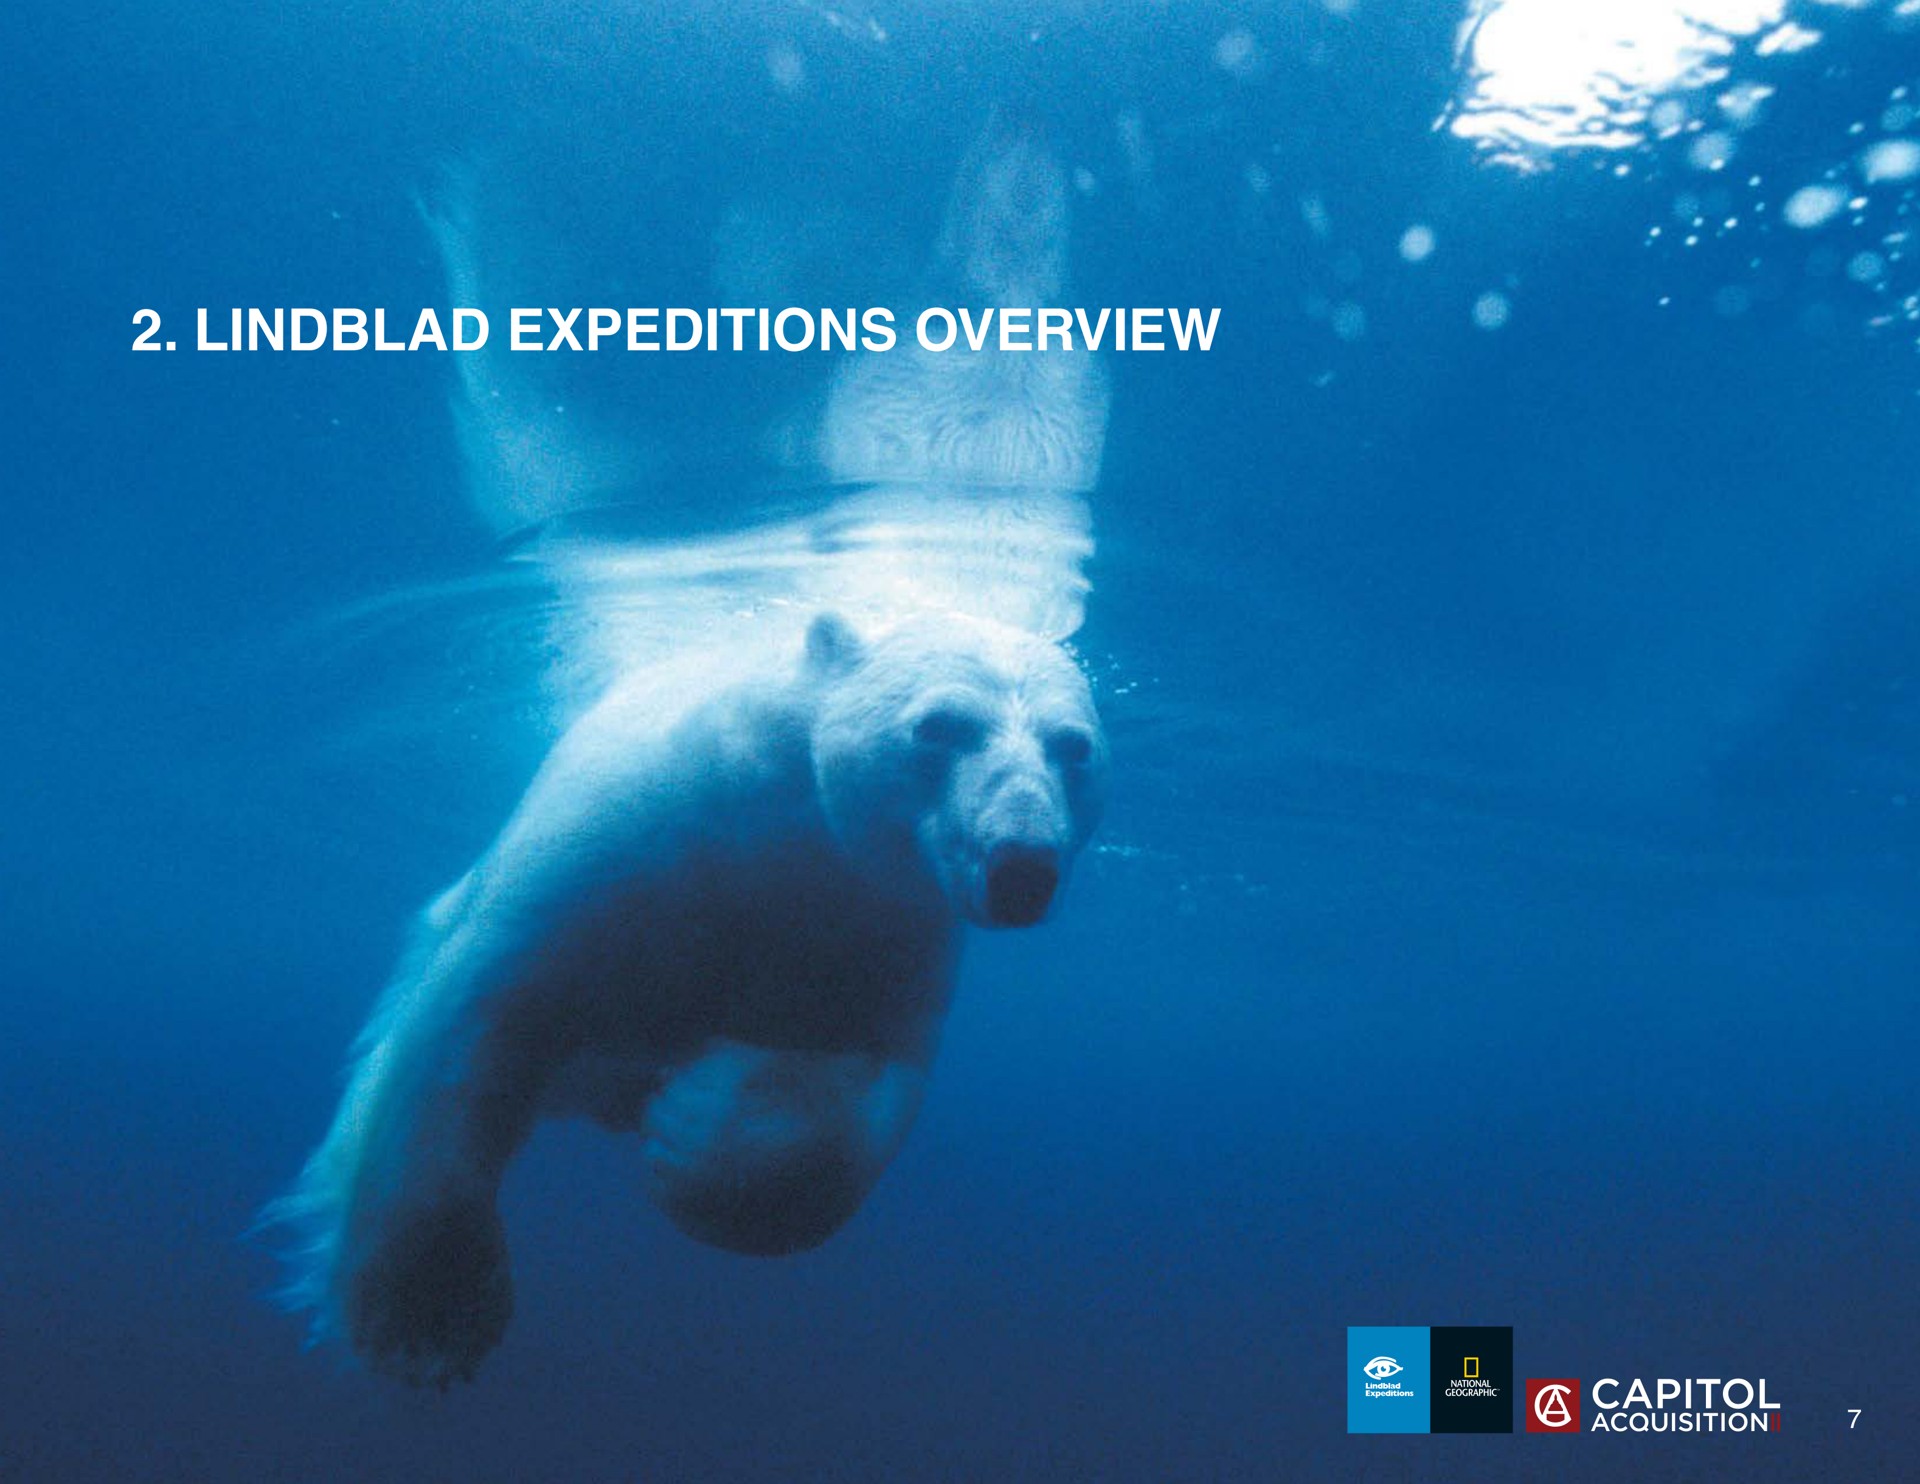 expeditions overview | Lindblad